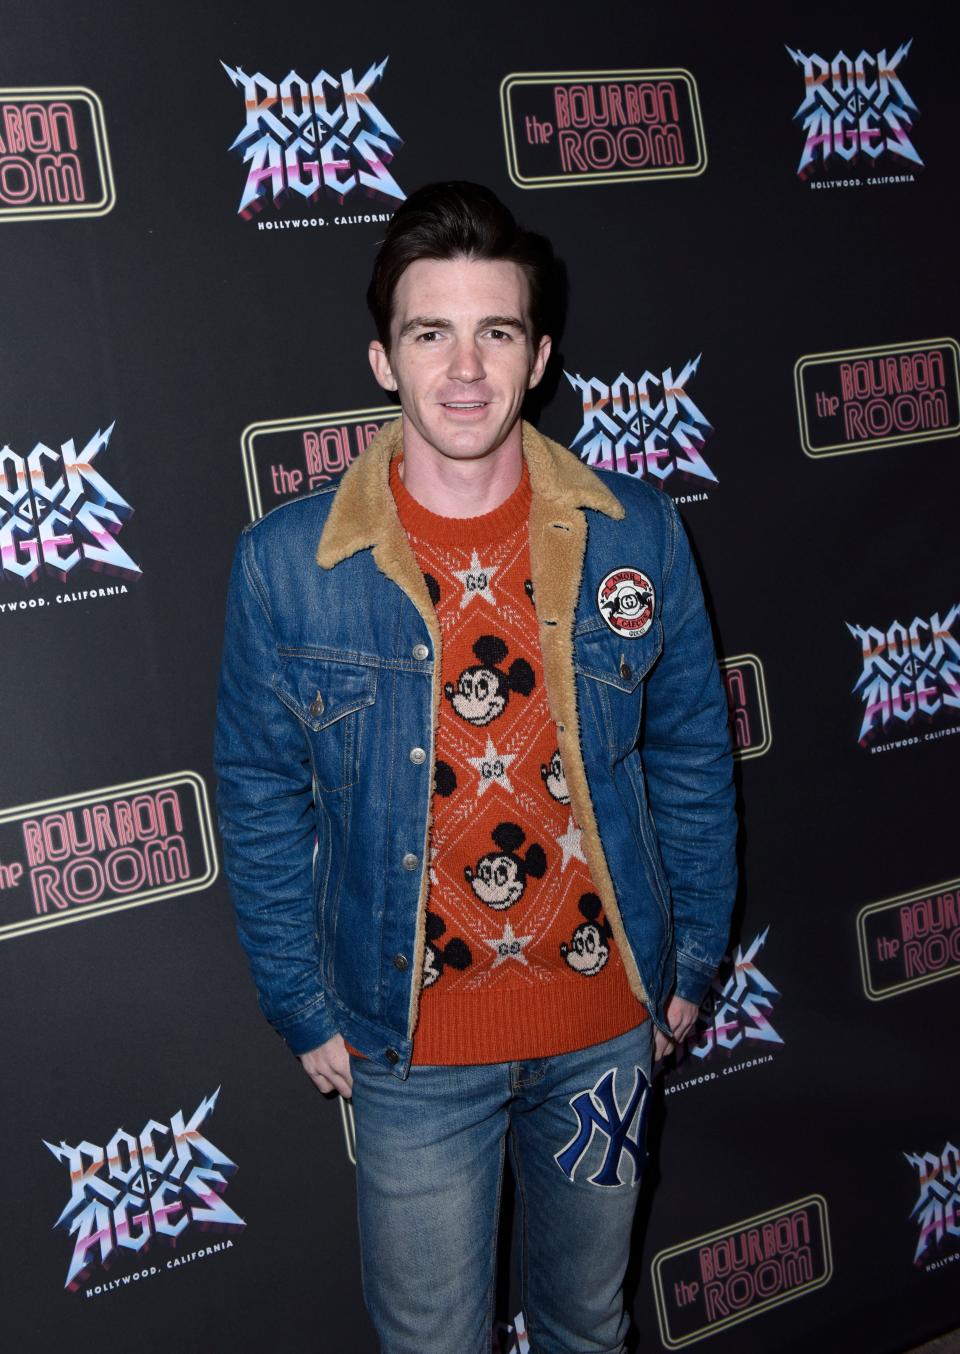 Drake Bell accused Brian Peck of "brutal" sexual abuse in the documentary "Quiet on Set."